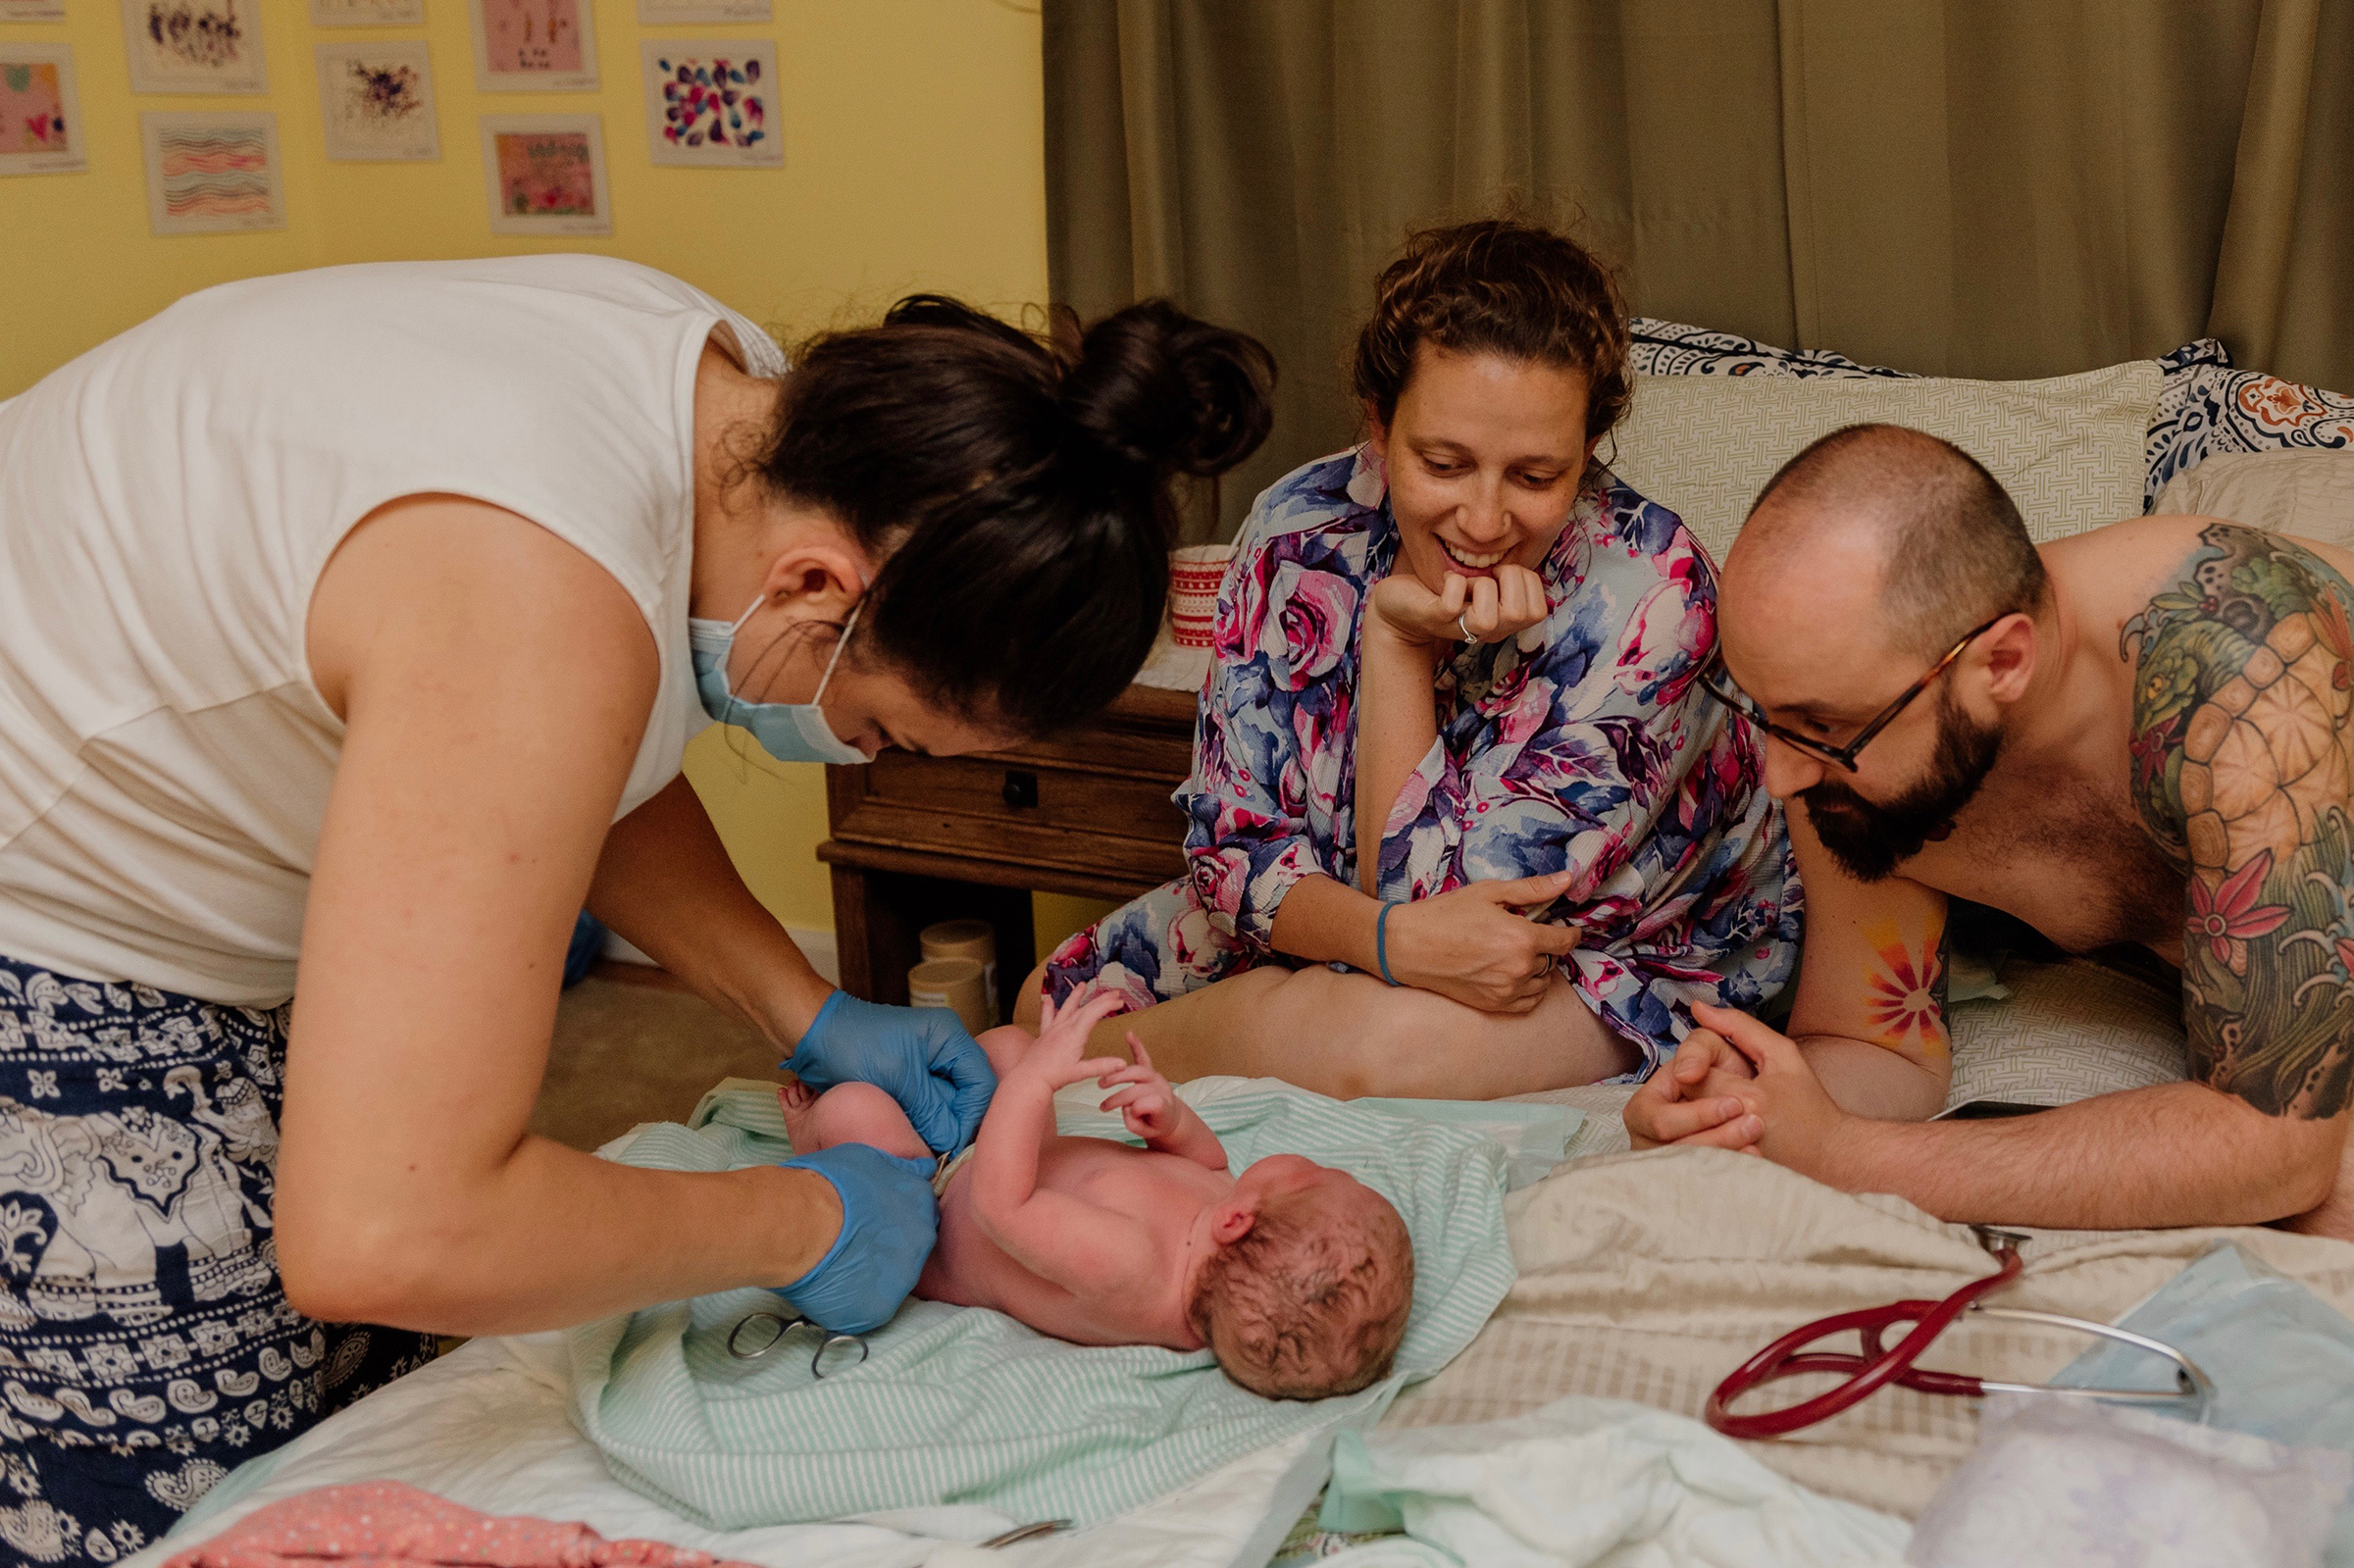 Photo courtesy of Caryn Davis (From left: Nuranisa Rae, a midwife; baby Caily; Caryn Davis; and Brian Davis)